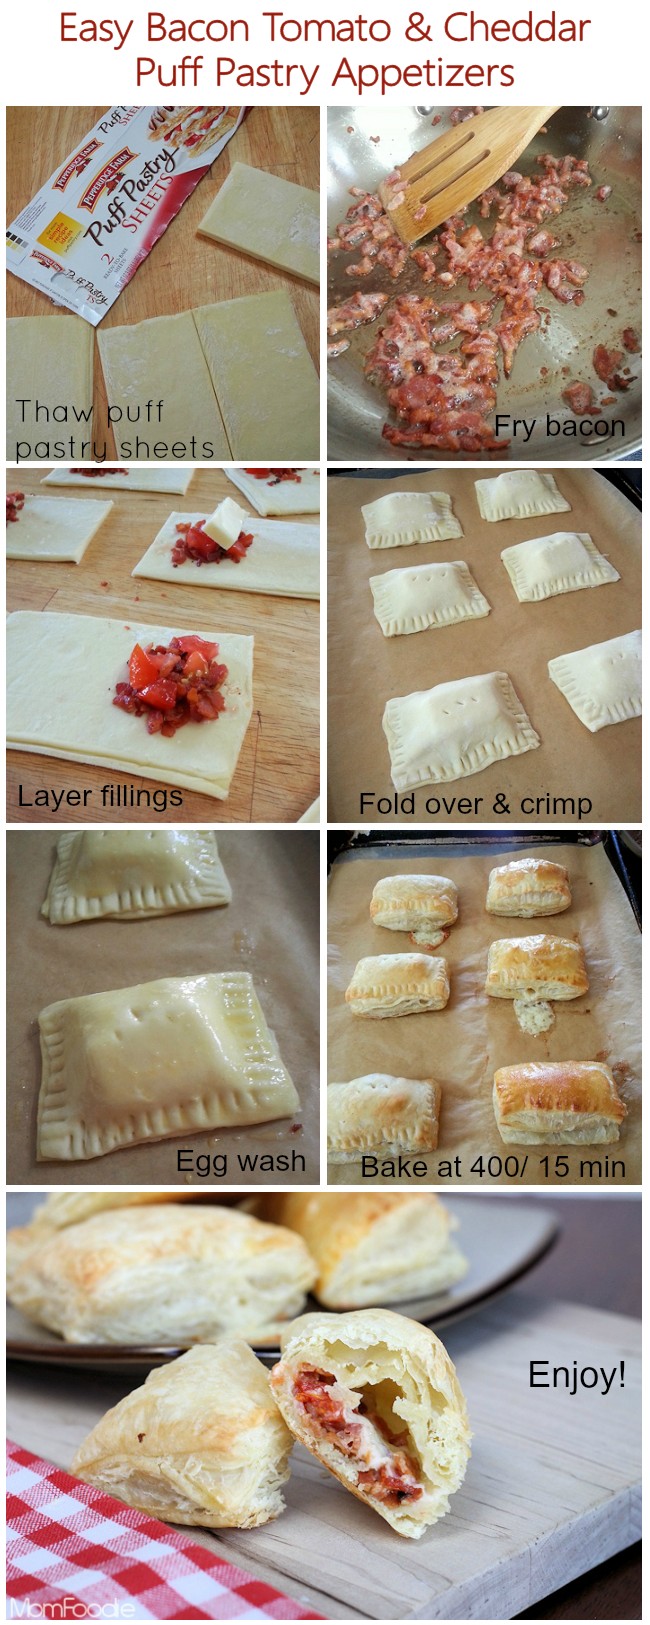 easy bacon tomato & cheddar puff pastry appetizers